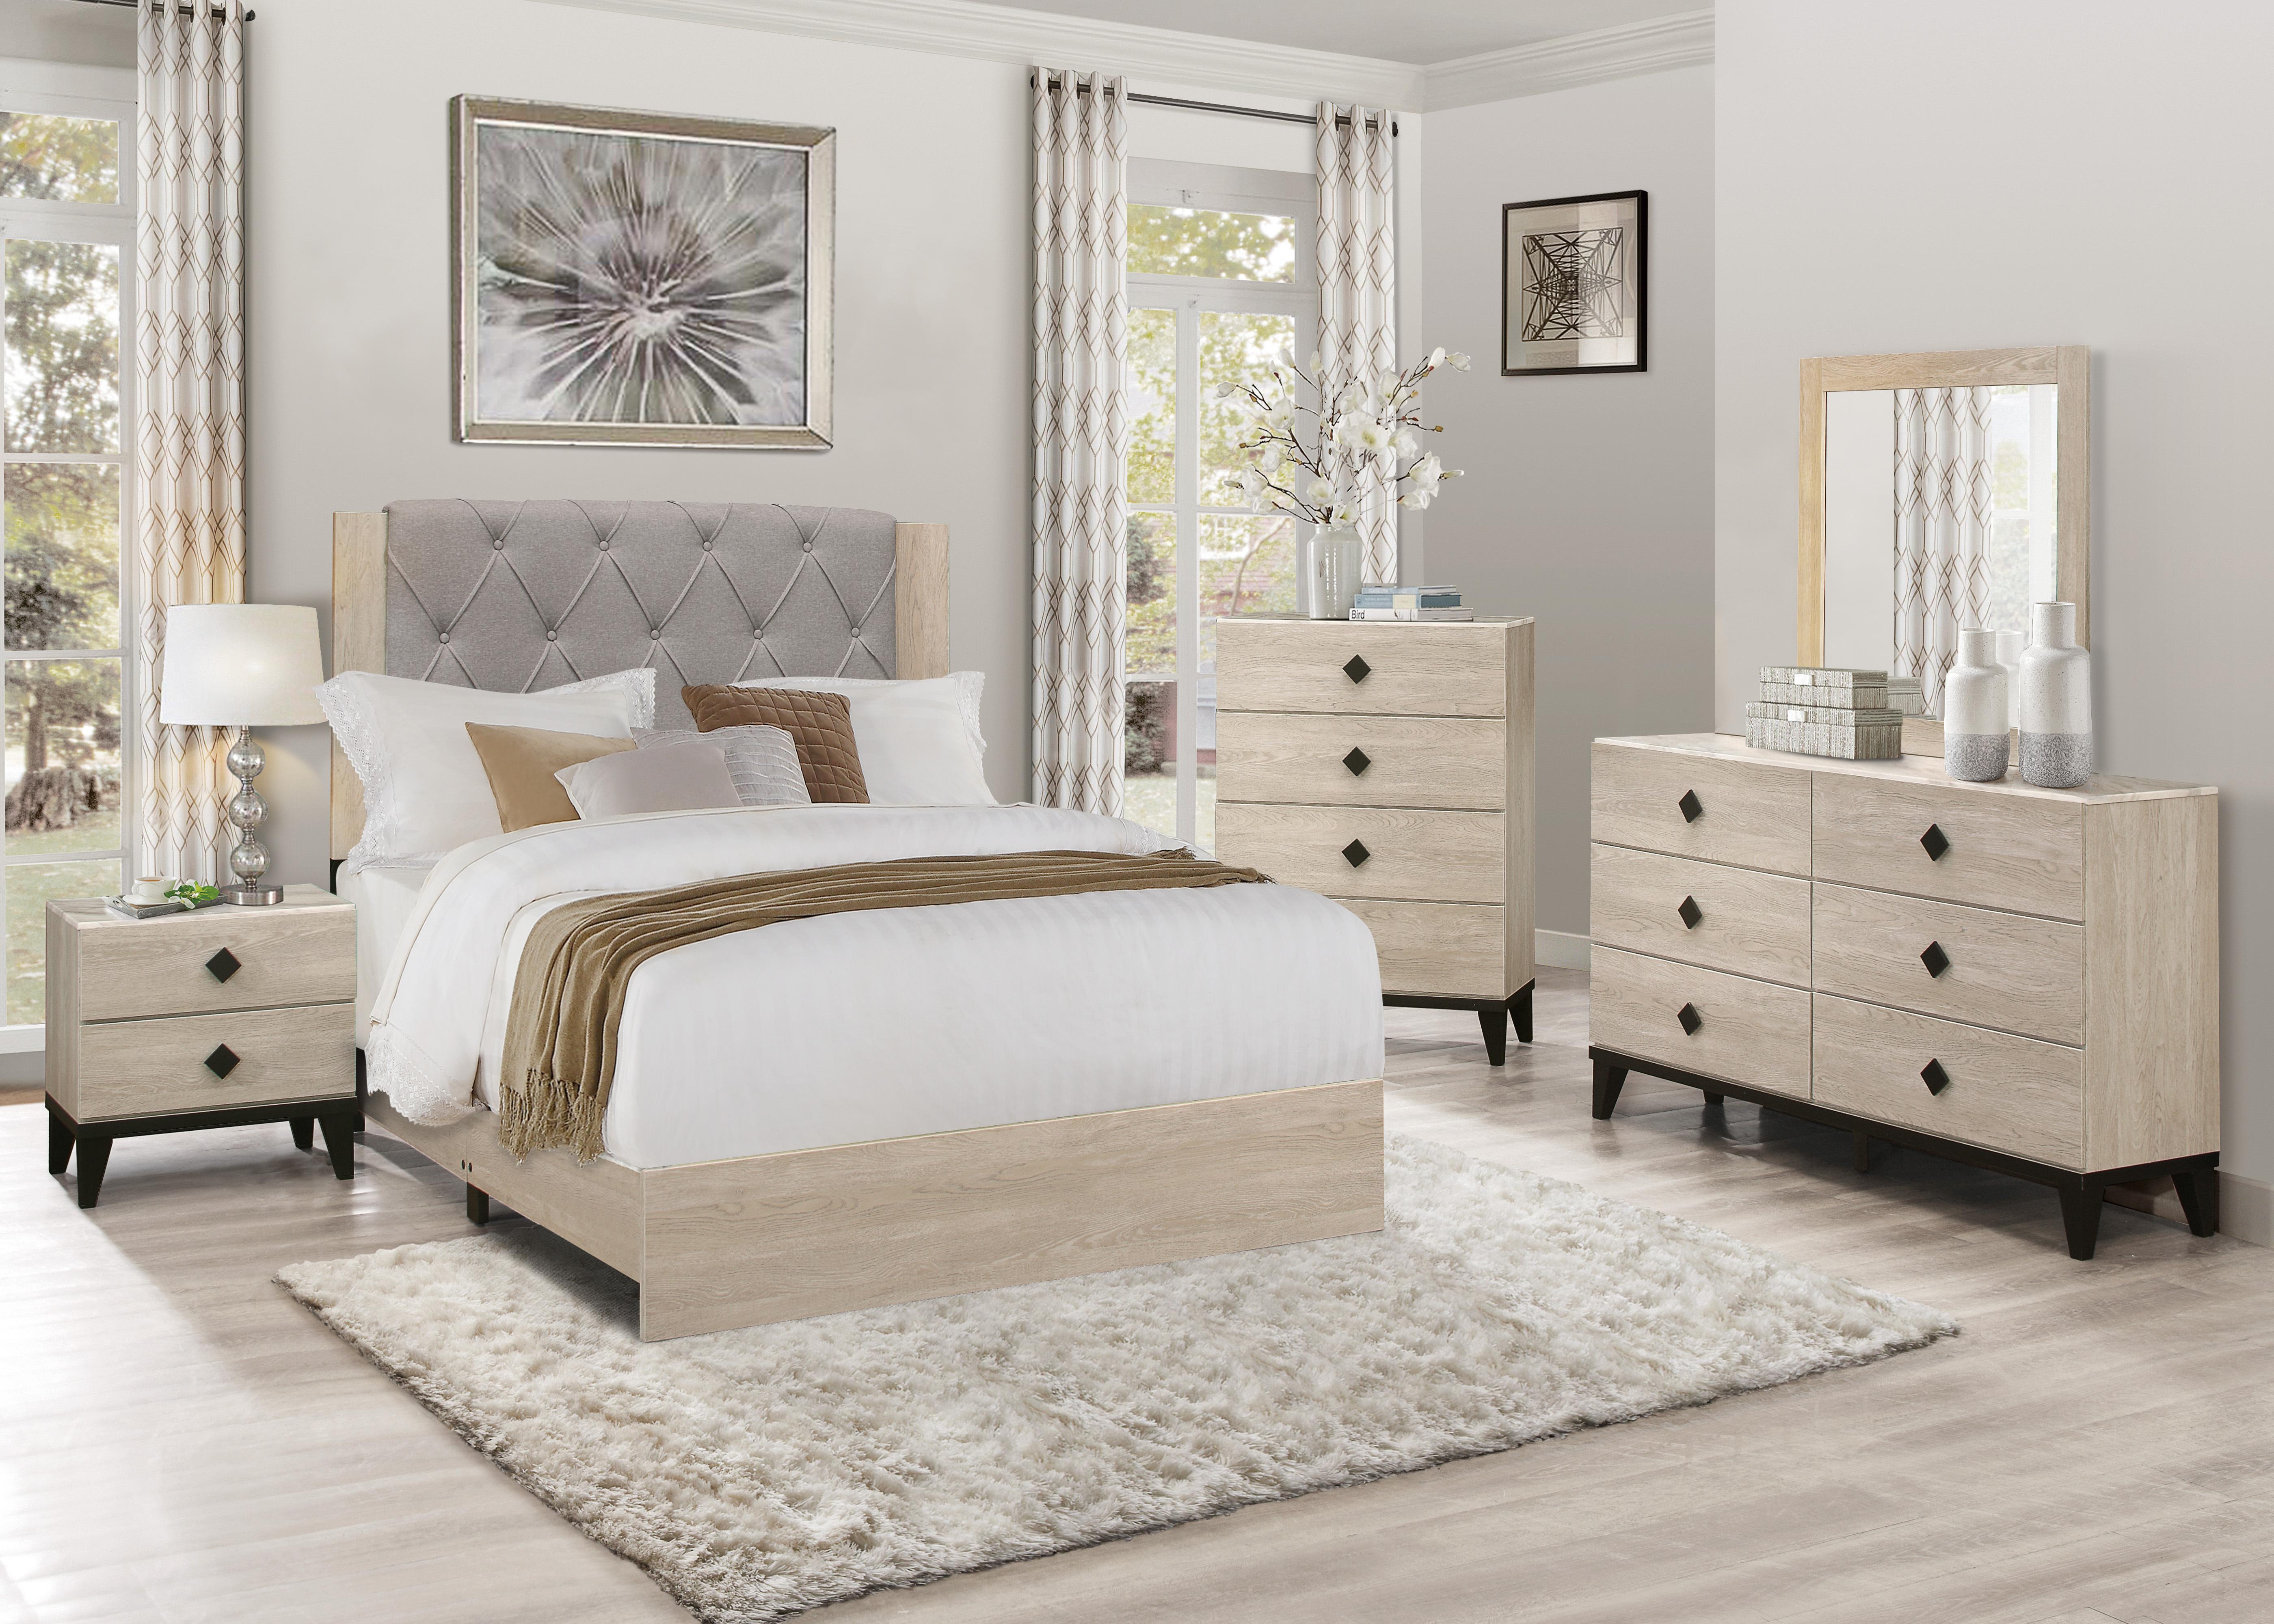 Modern Bedroom Set 1524F-1-6PC Whiting 1524F-1-6PC in Cream Polyester